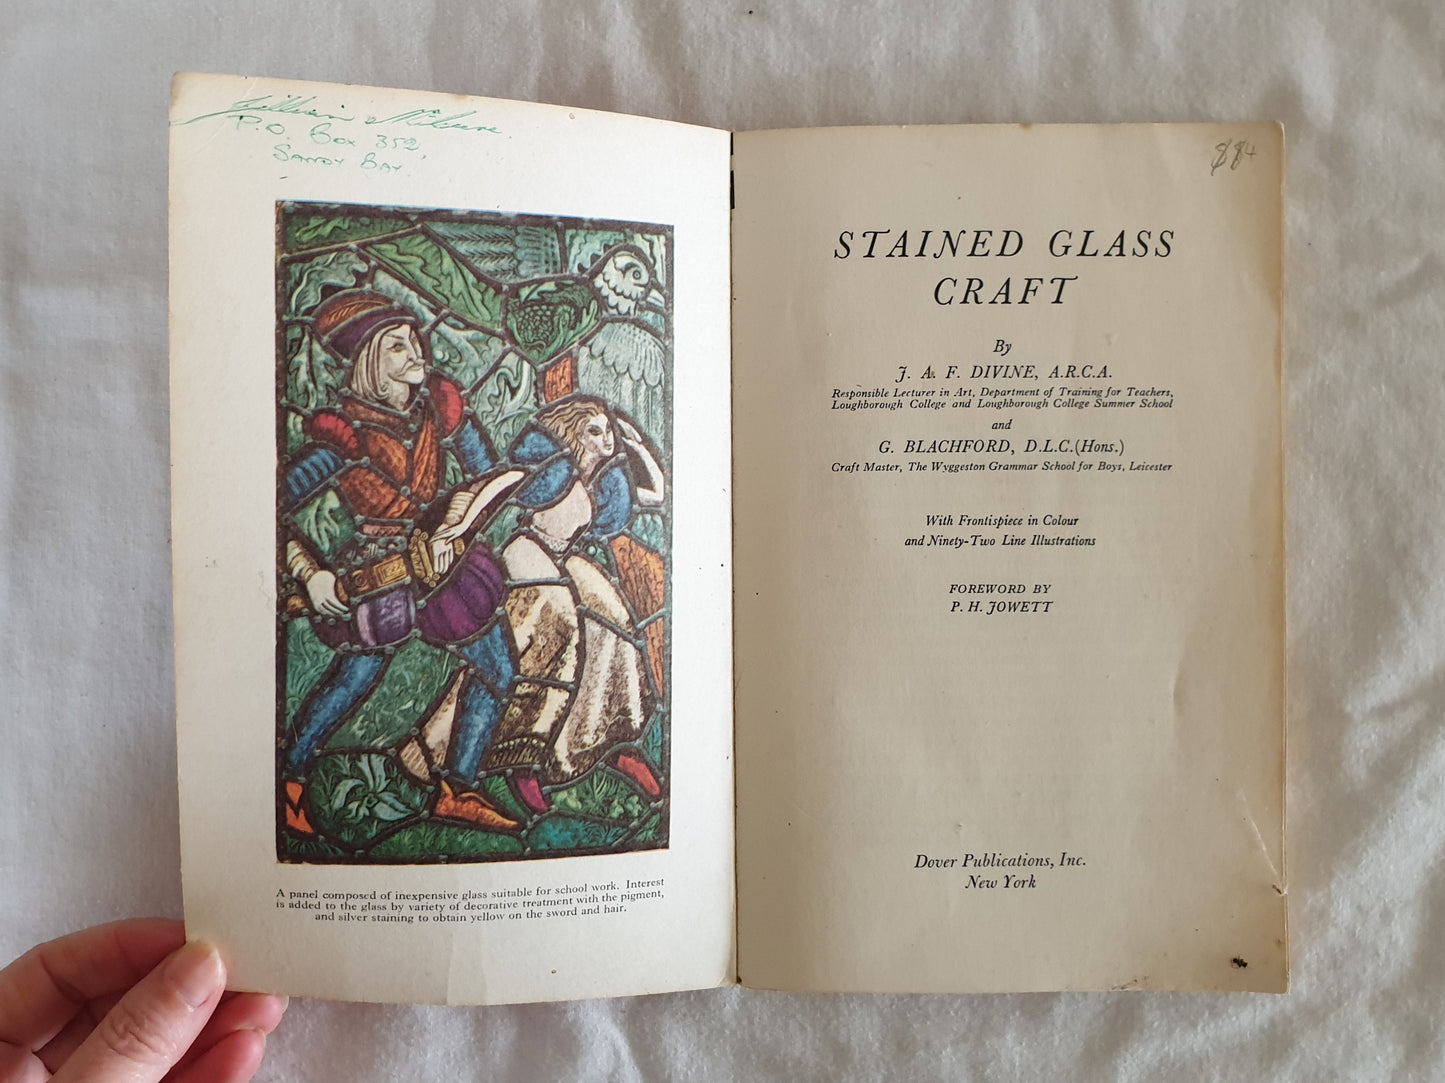 Stained Glass Craft by J. A. F. Divine and G. Blachford